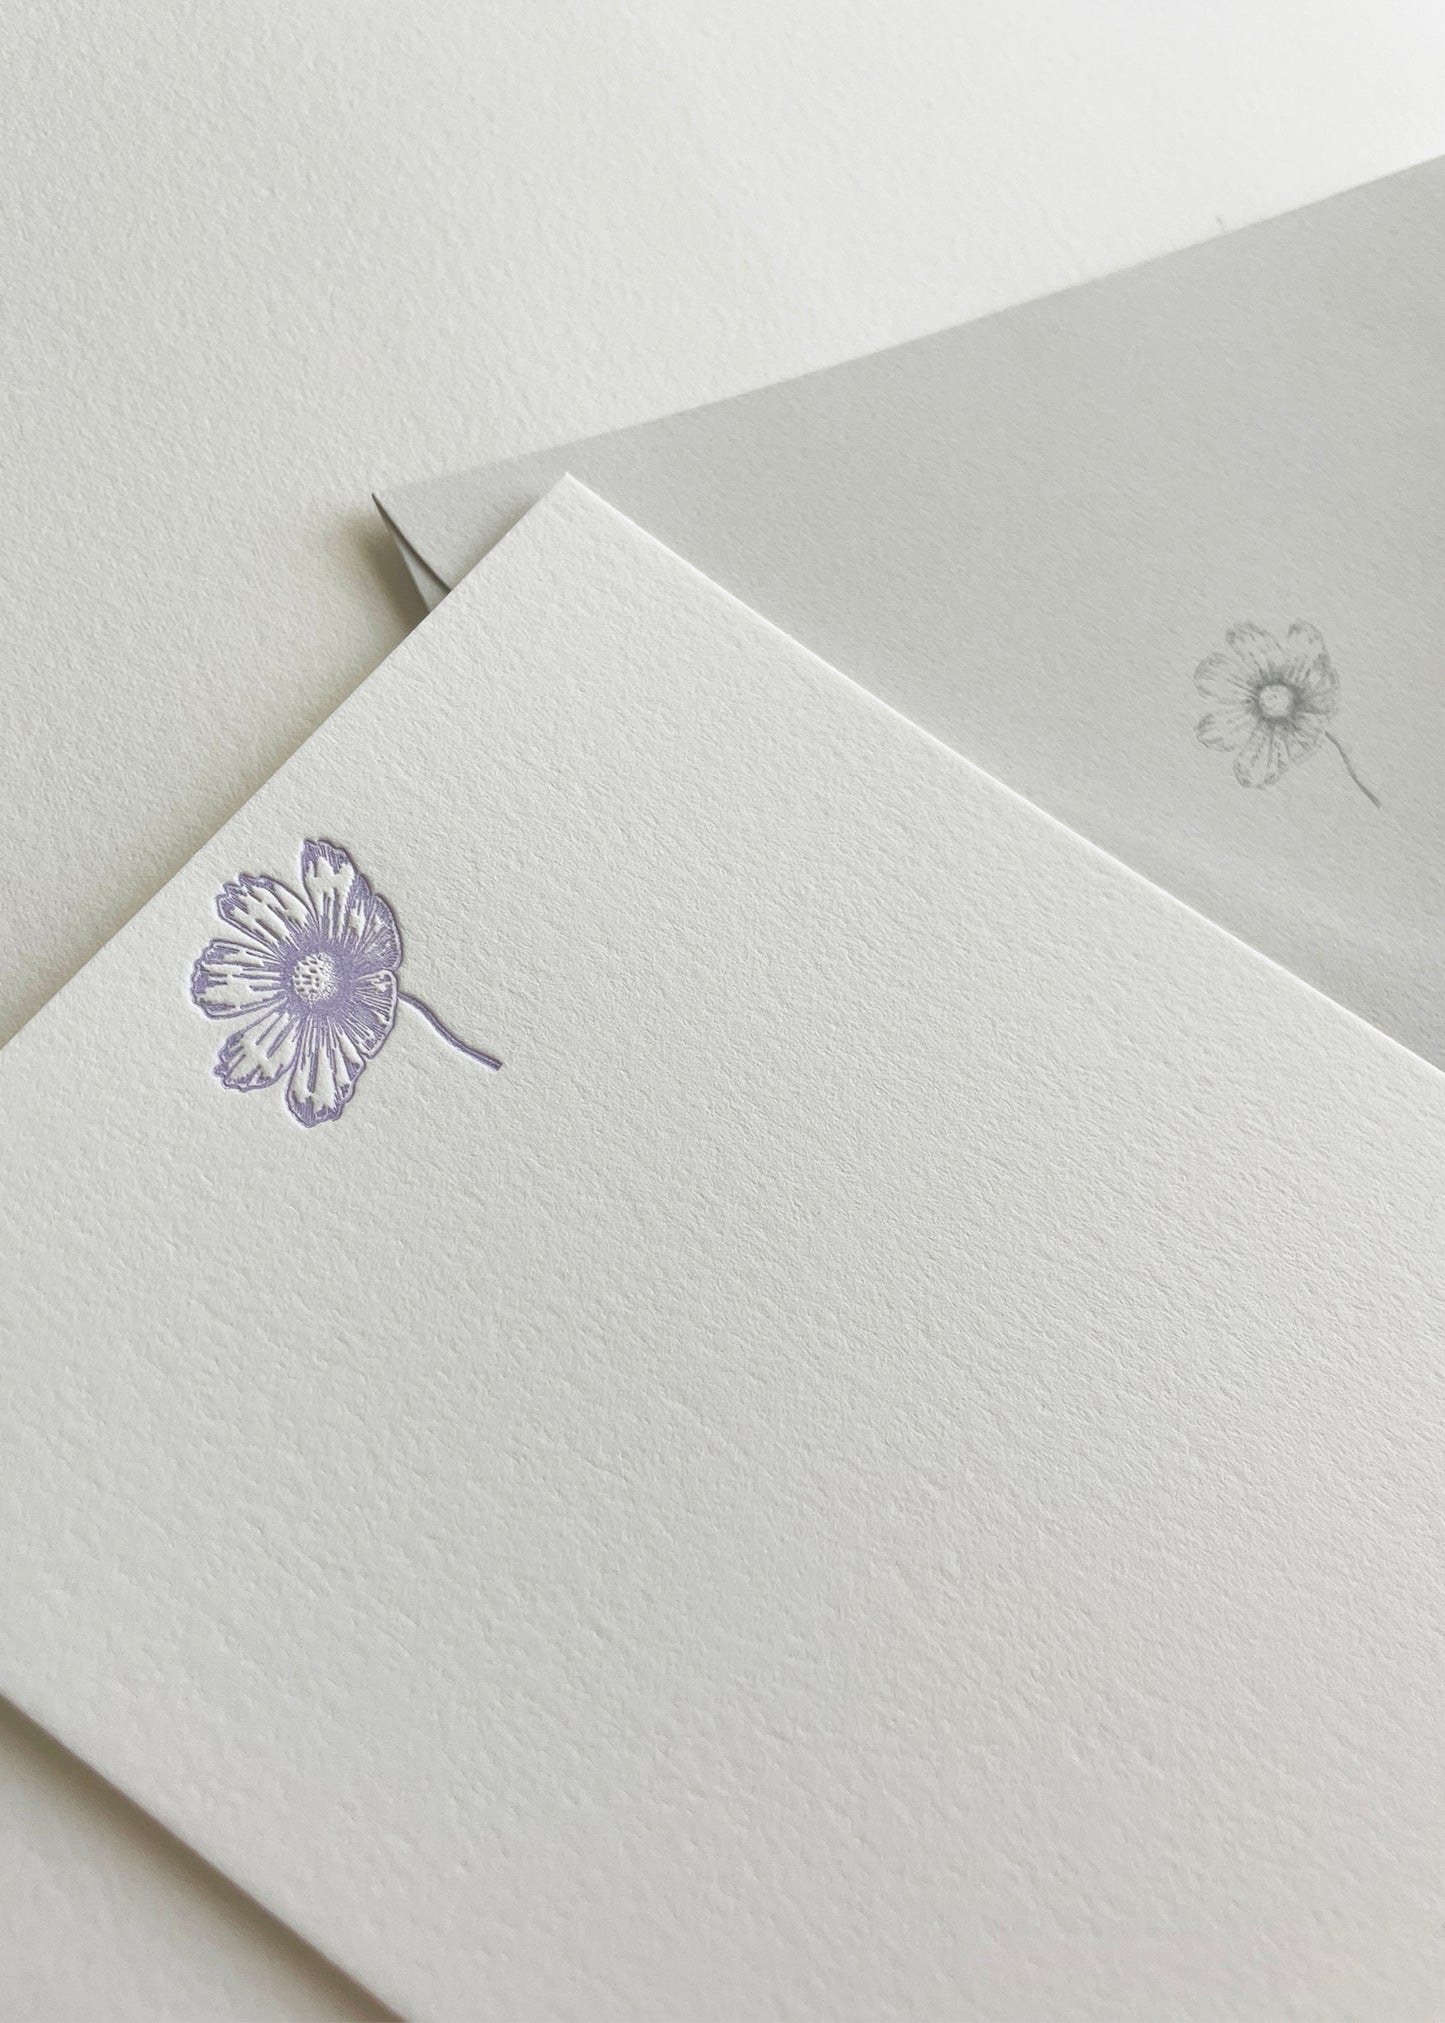 Letterpress flat note card with a purple cosmo flower by Rust Belt Love